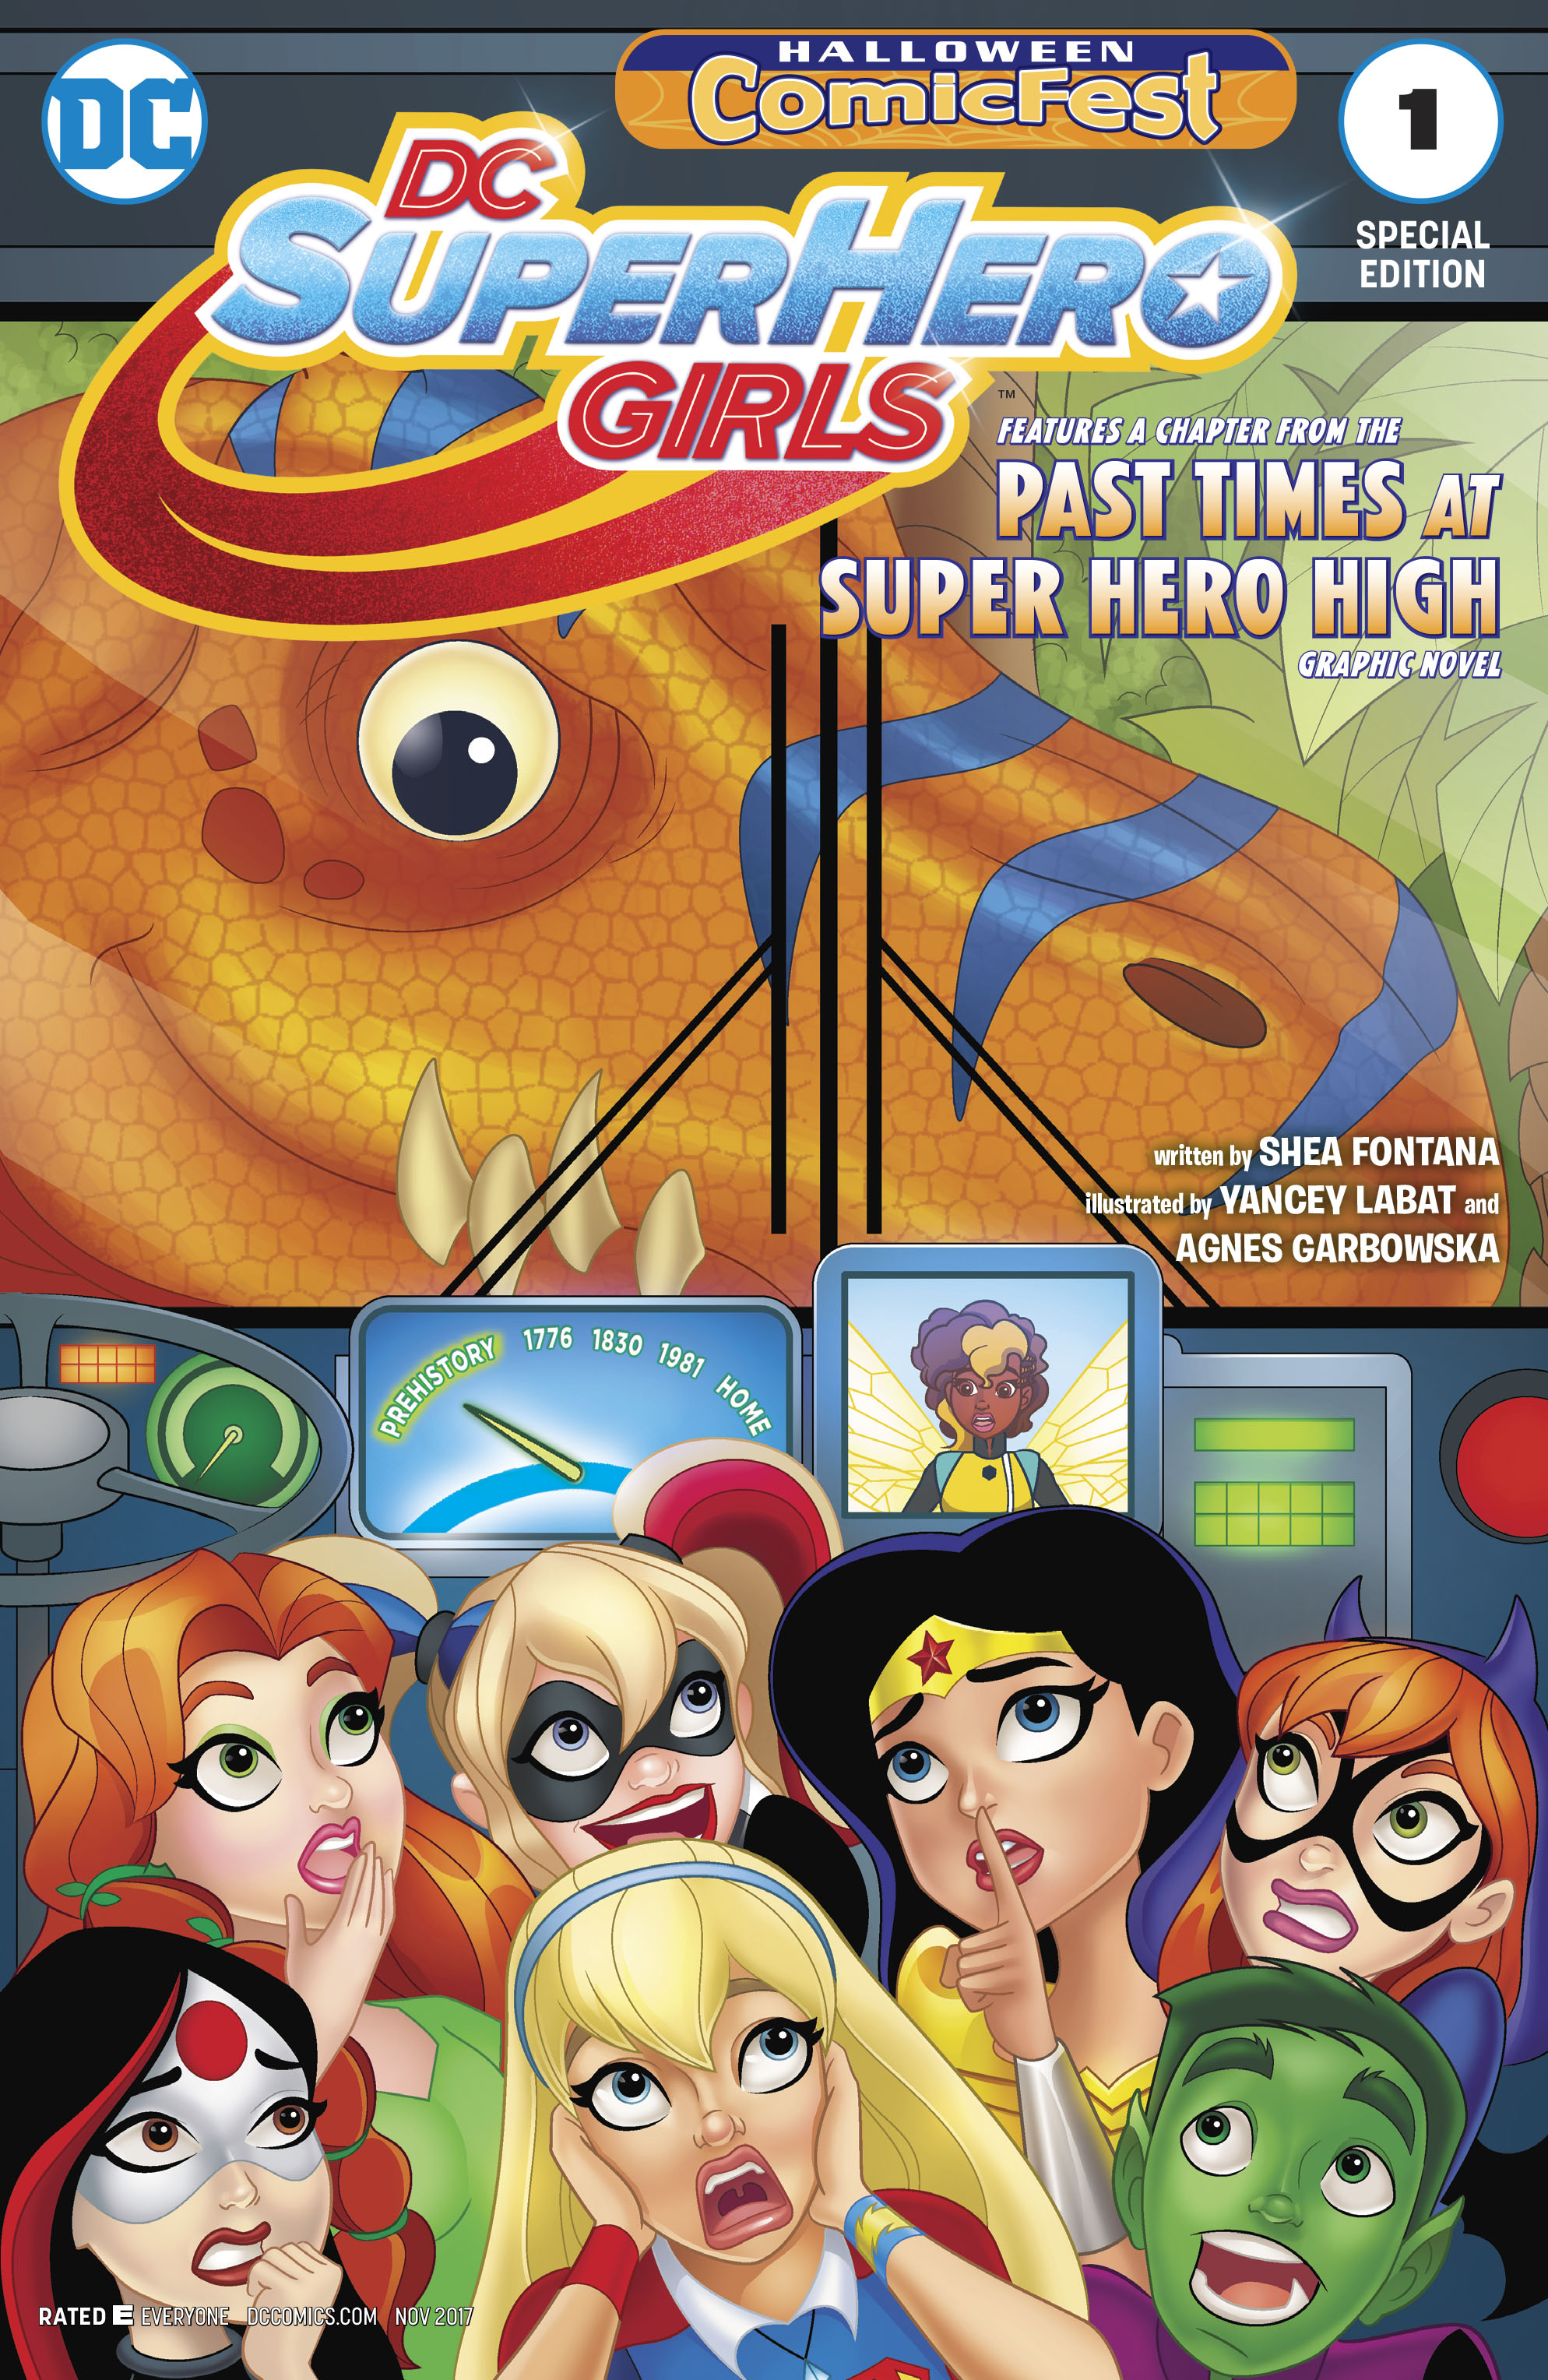 DC Super Hero Girls 2017 Halloween Comic Fest Special Edition (2017): Chapter 1 - Page 1